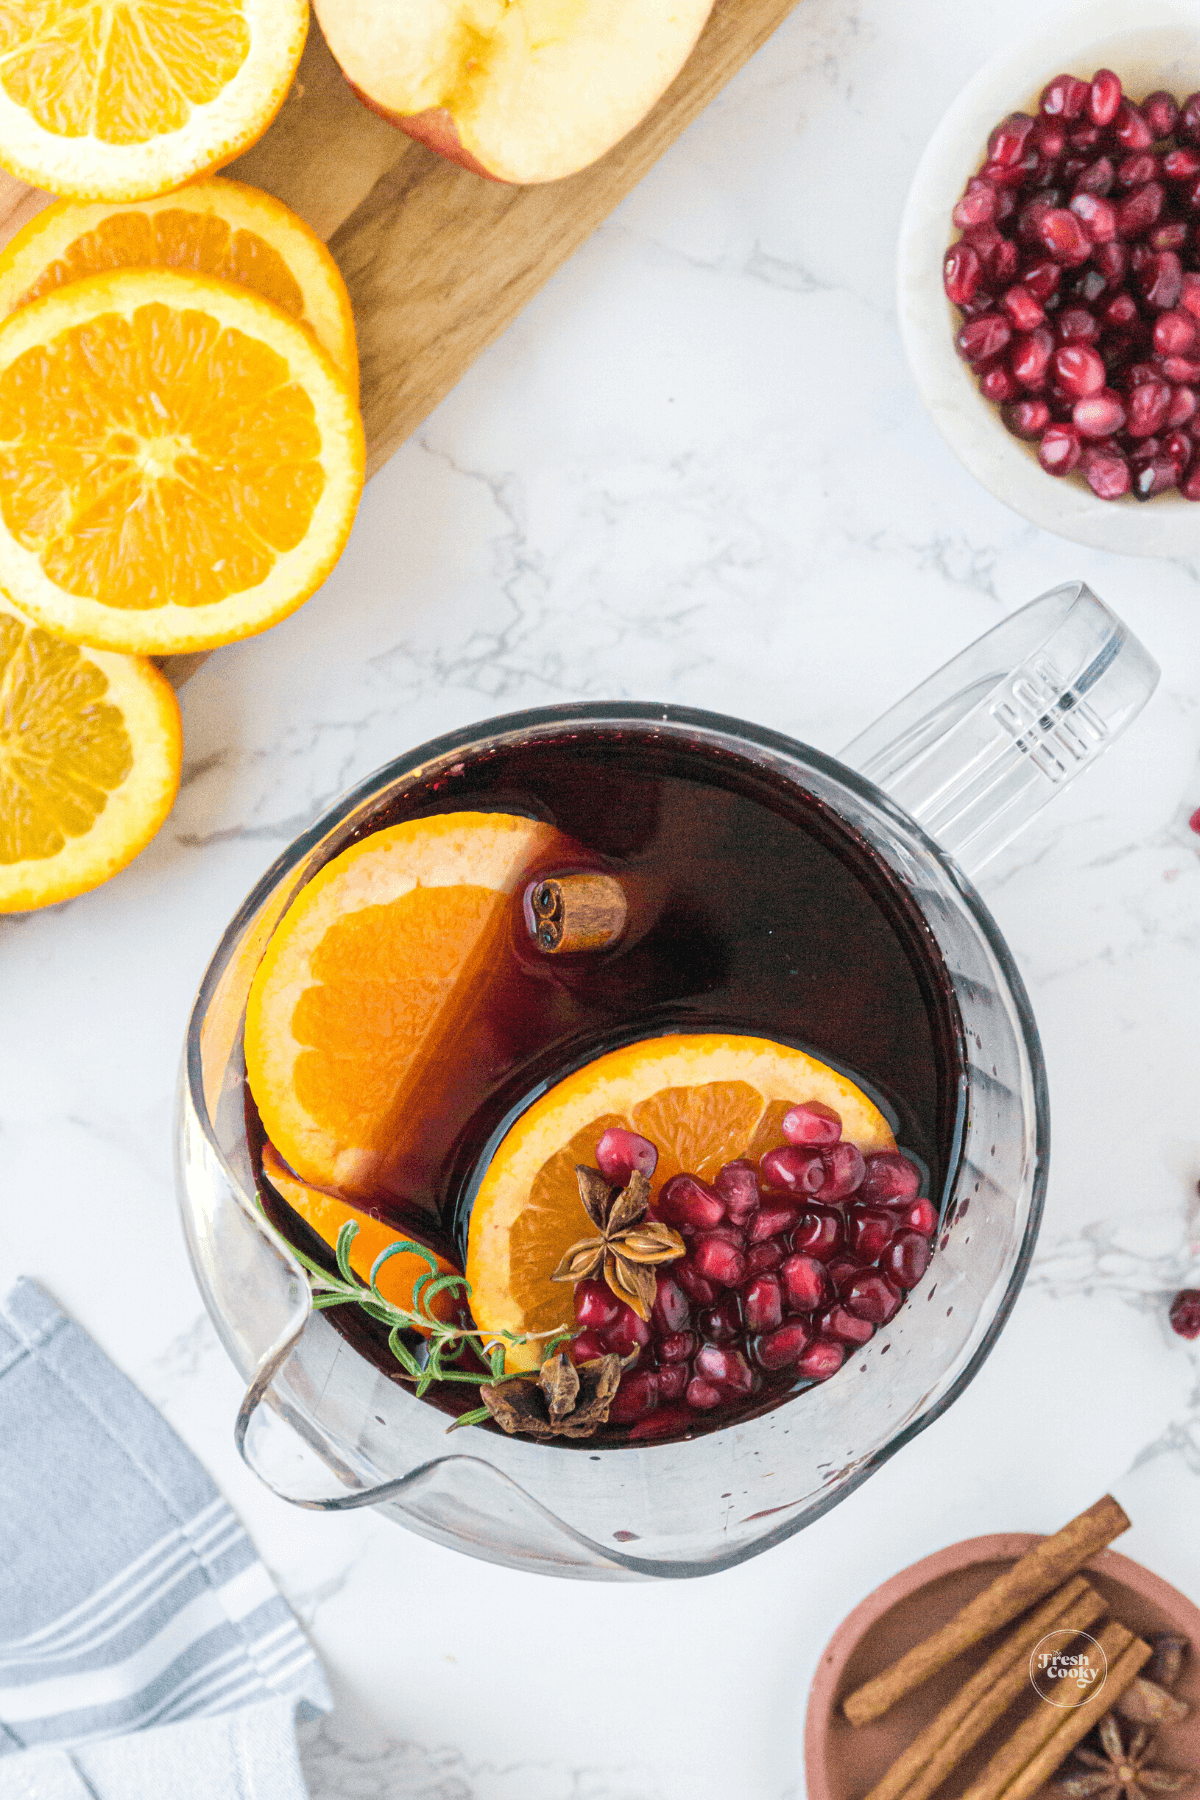 Pitcher filled with spiced holiday sangria with fruit slices ready for garnish.